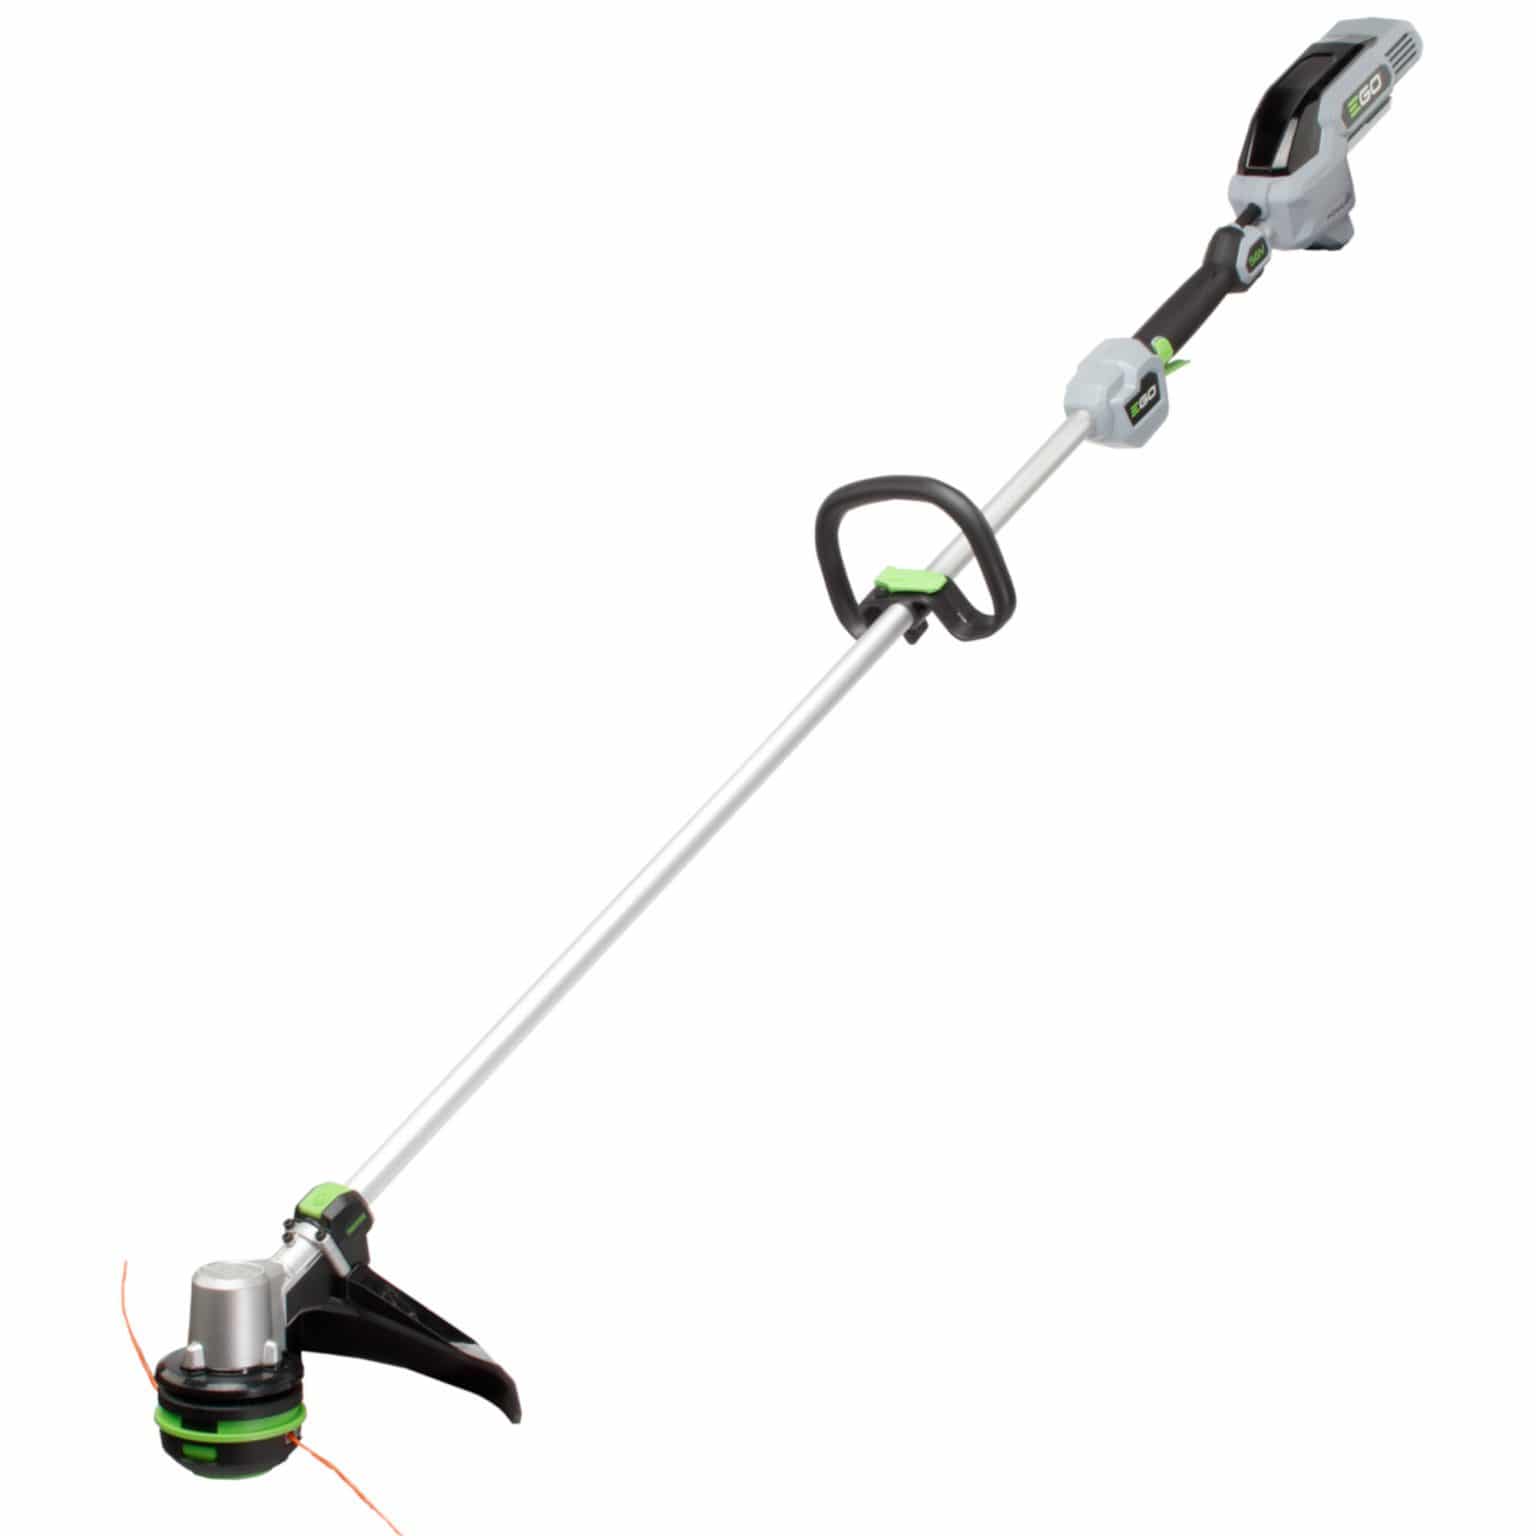 EGO ST1510E Battery Grass Trimmer with powerload head